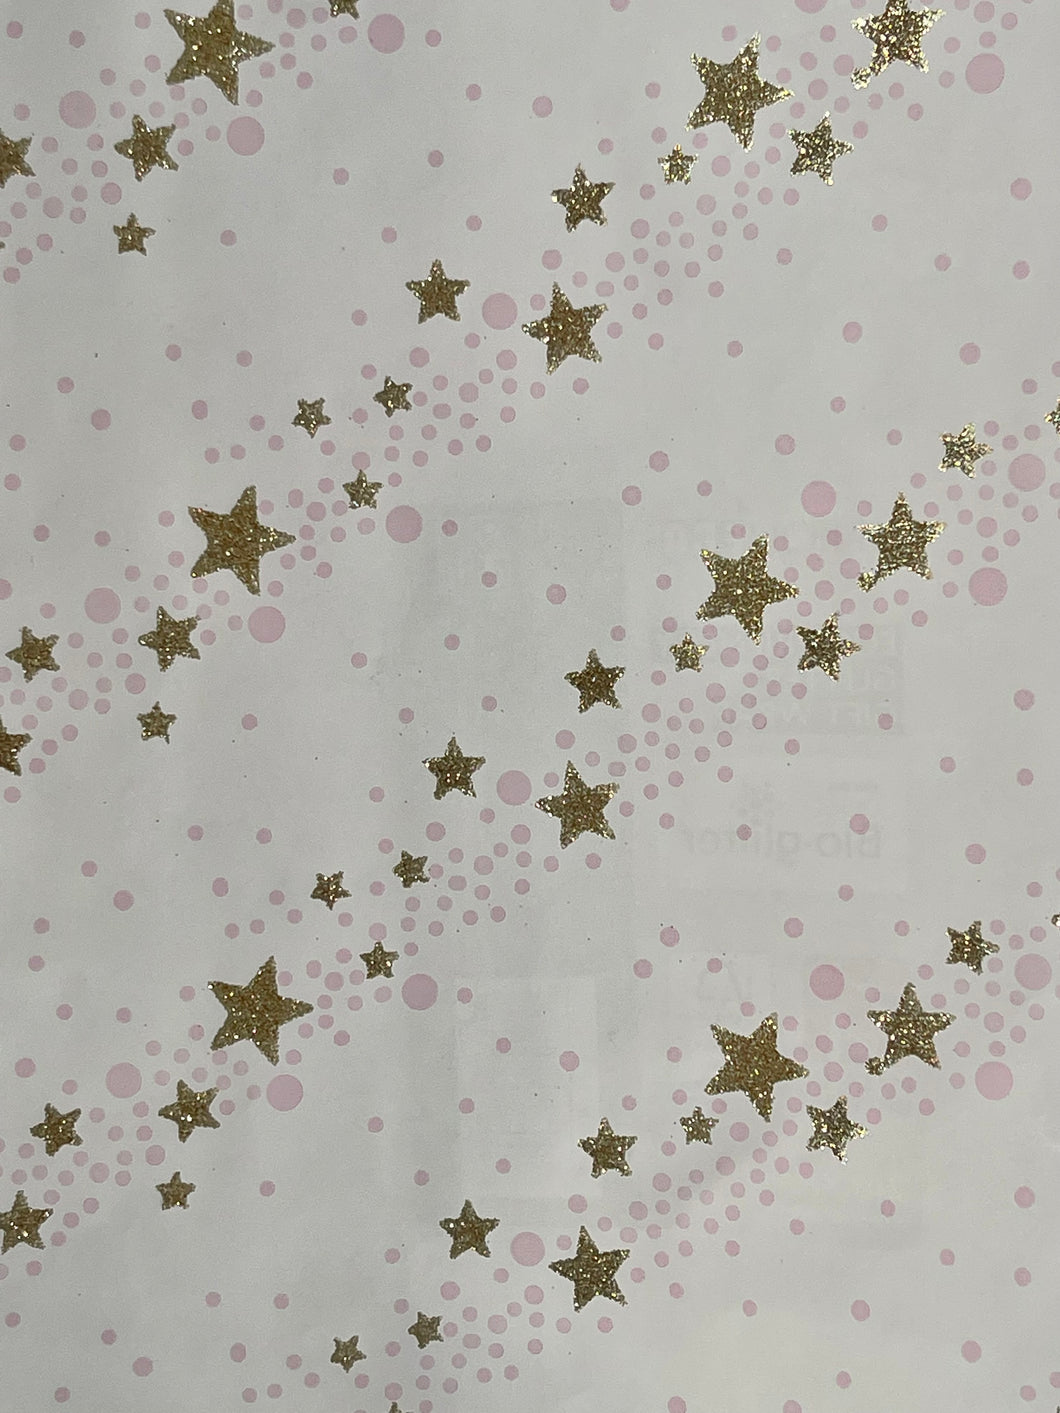 Shooting Stars Wrapping Paper